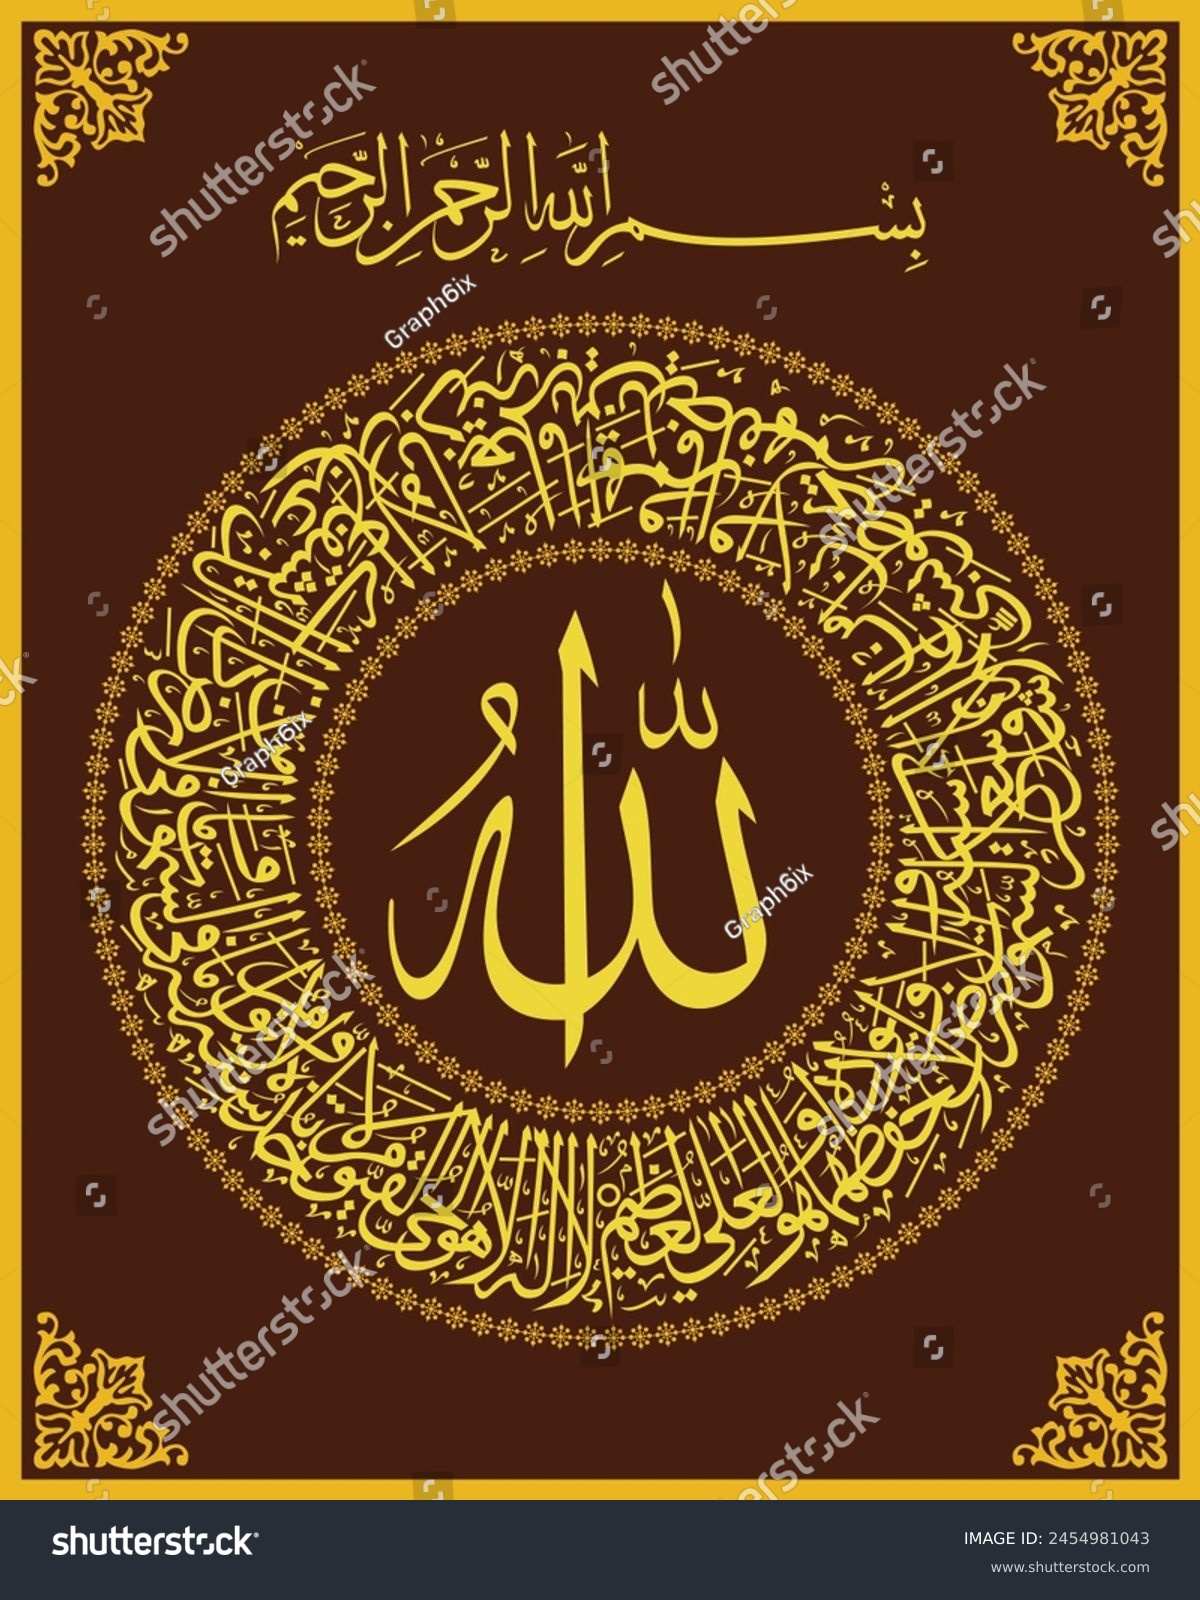 SVG of Islamic calligraphic from verse 255 from chapter 